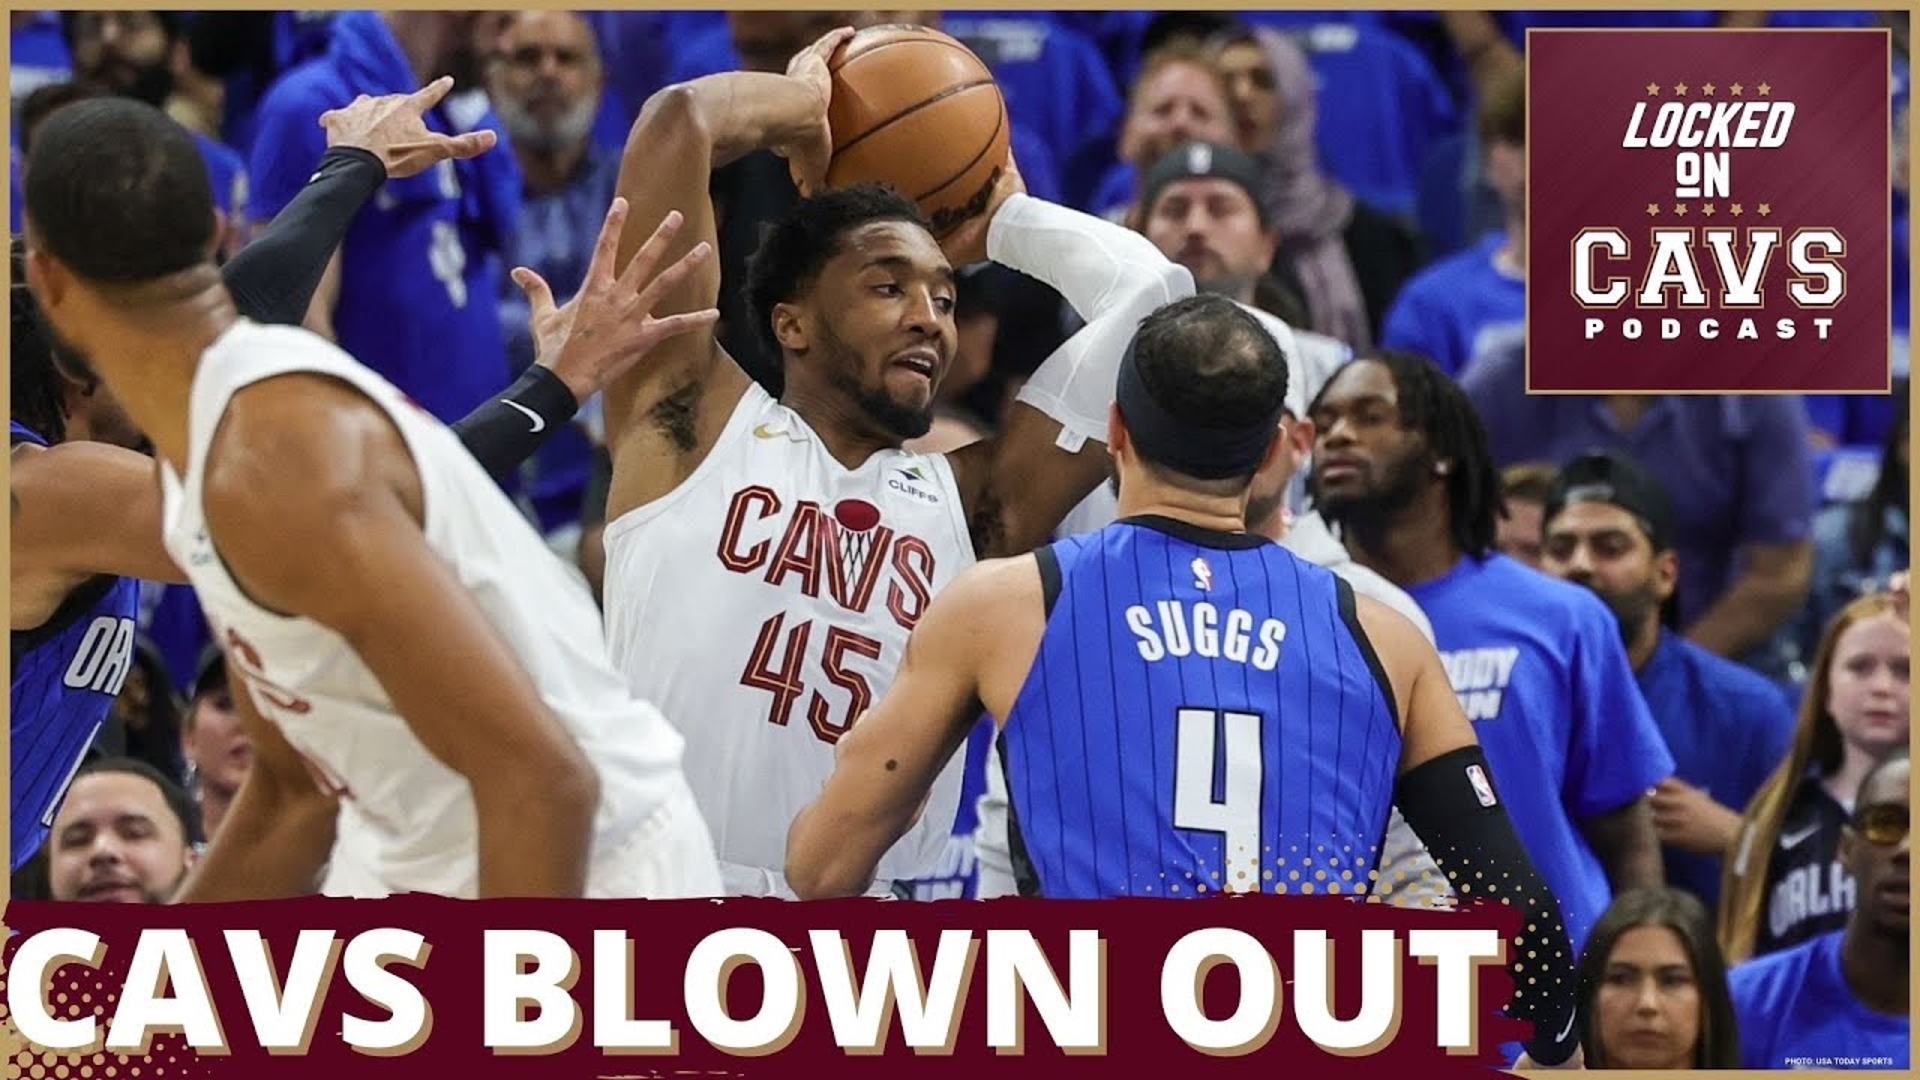 Chris Manning and Evan Dammarrell get into the Cavs’ Game 3 loss, what went wrong with the Cavs’ offense, and more.